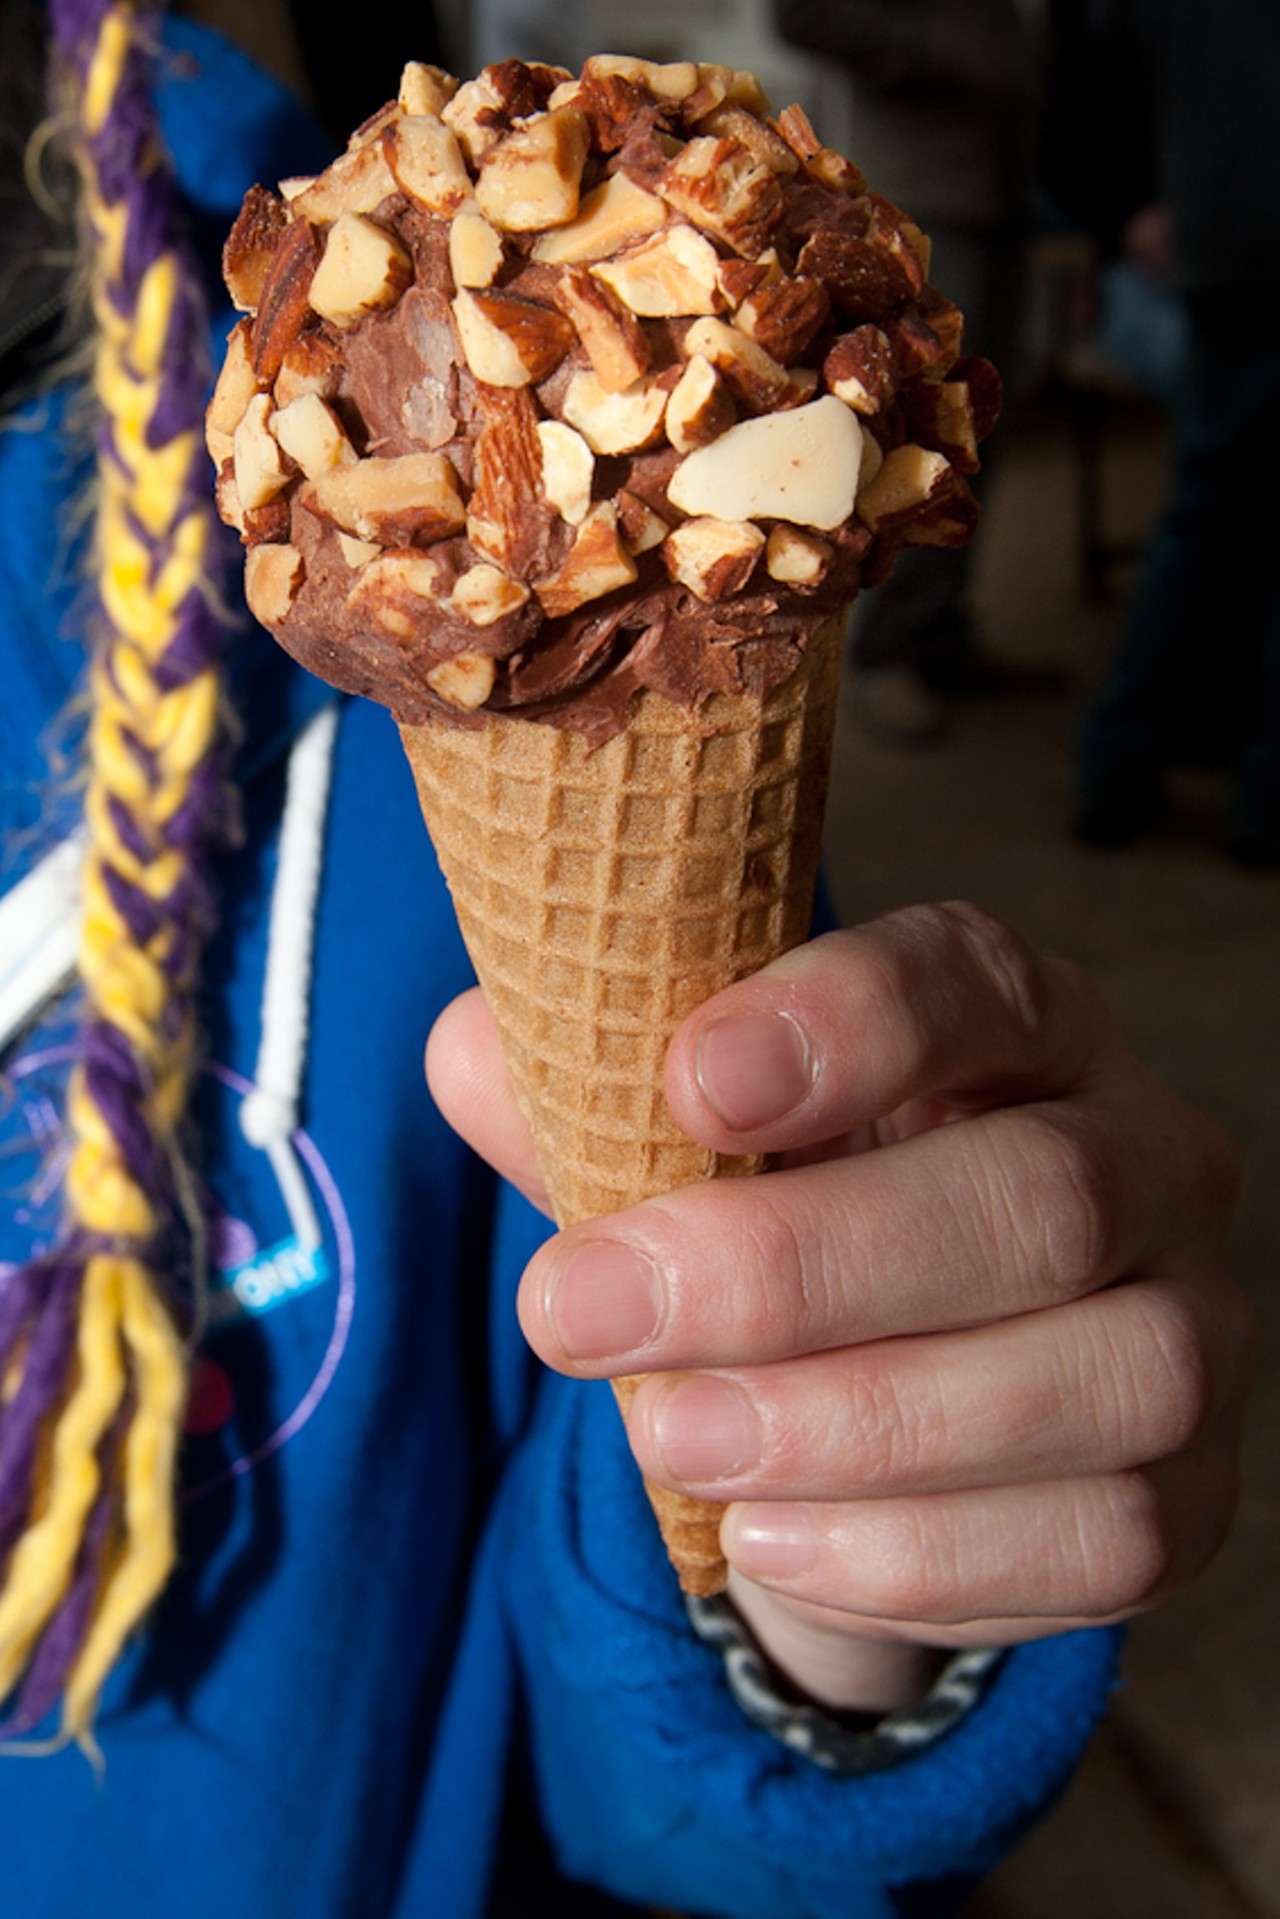 A classic vanilla and chocolate cone topped with almonds from I Scream Cakes.&nbsp;